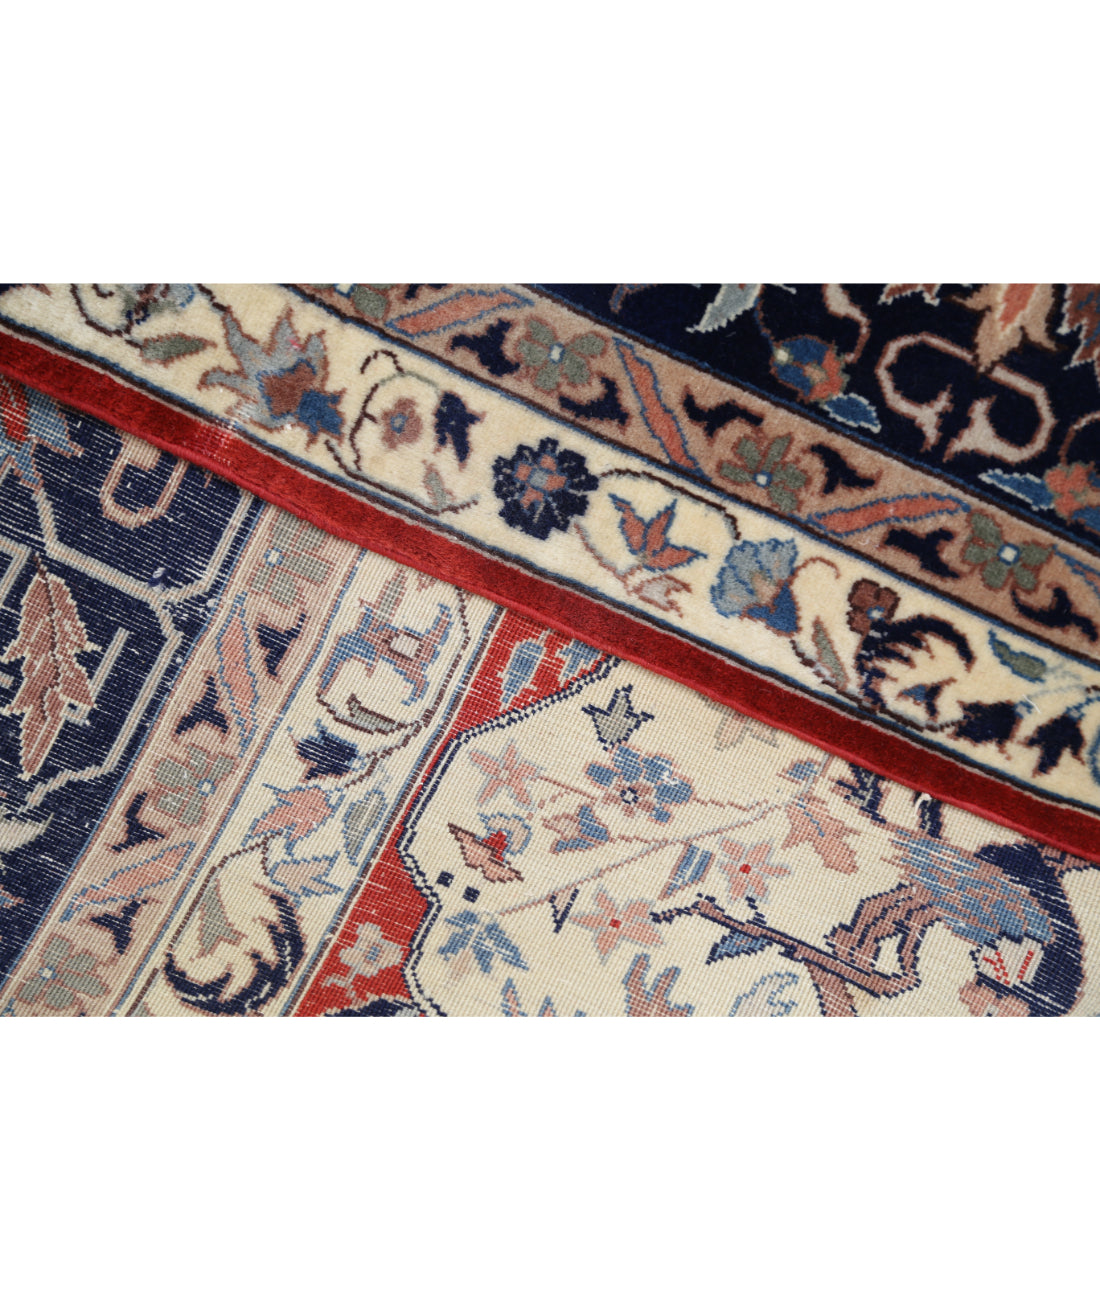 Heritage 7' 10" X 9' 9" Hand-Knotted Wool Rug 7' 10" X 9' 9" (239 X 297) / Red / Blue